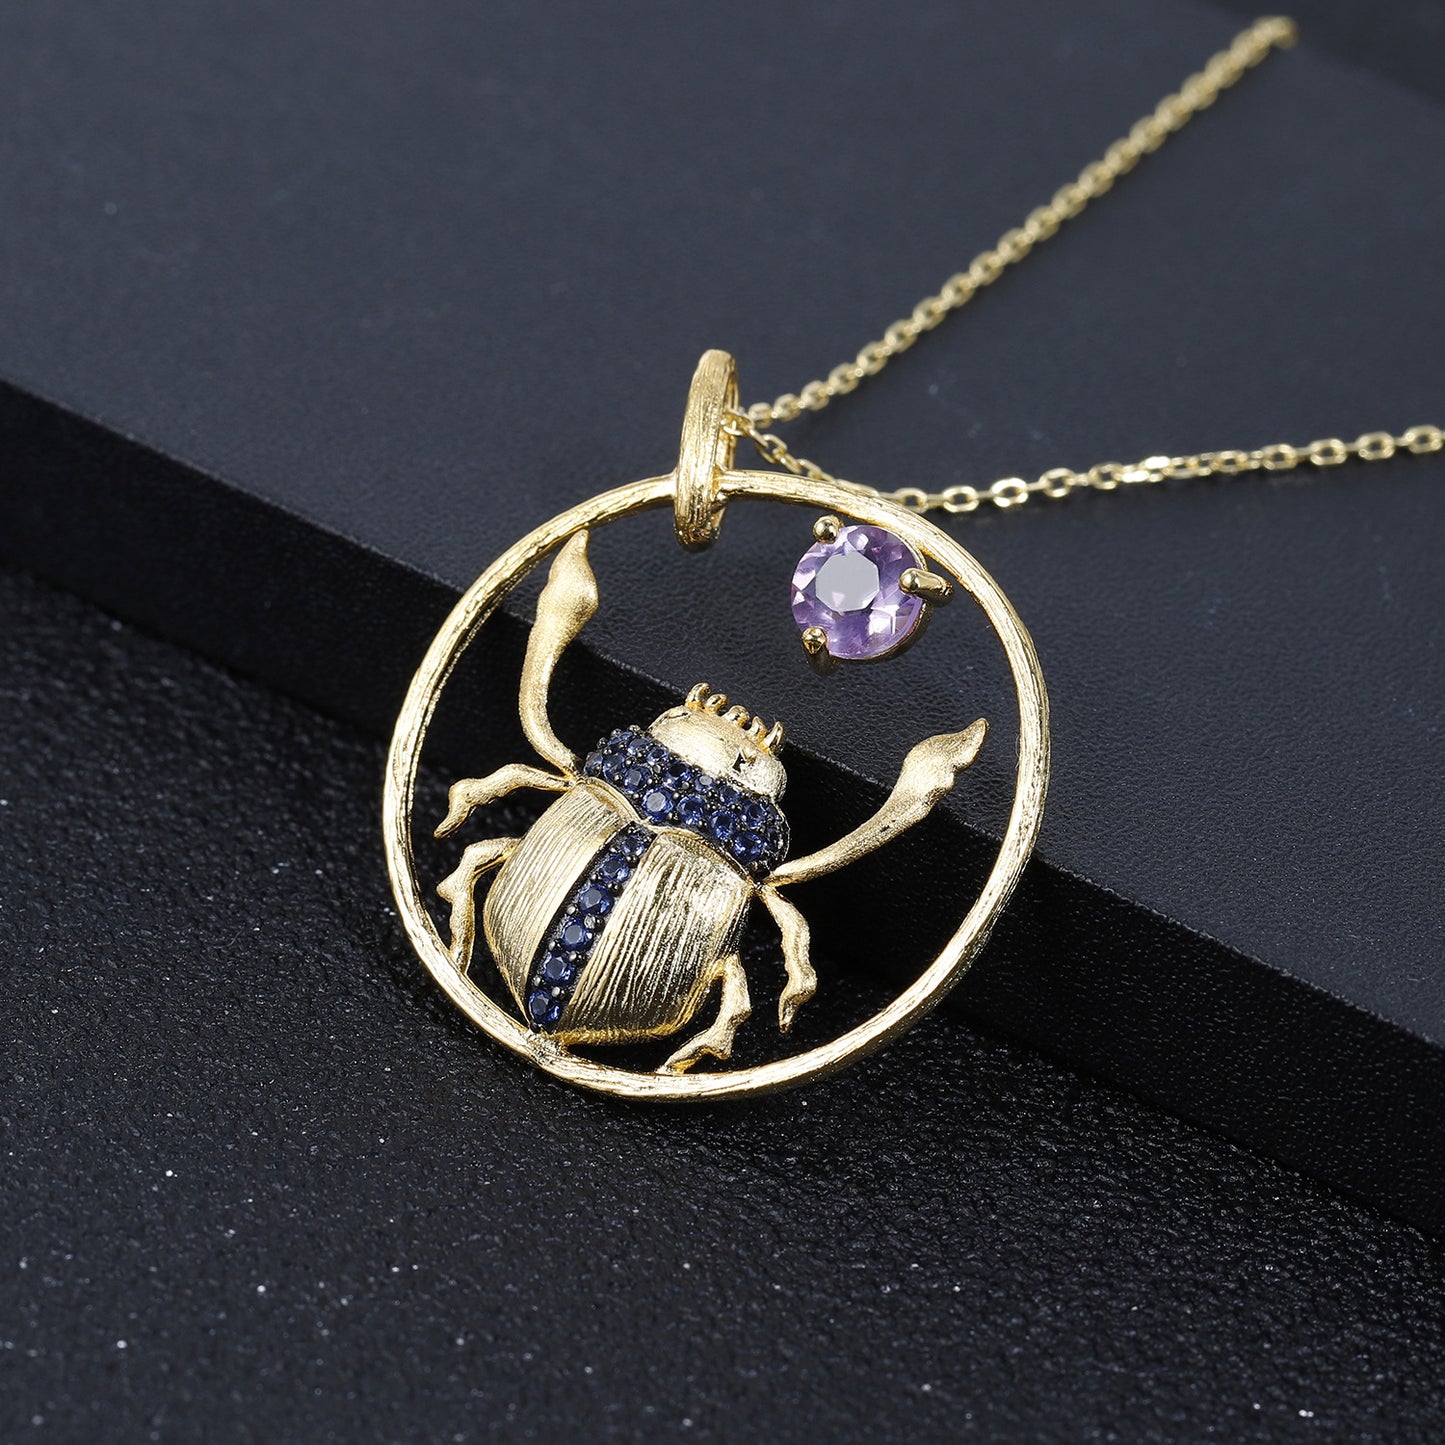 Designer Premium Insect Element Personality Design Natural Amethyst Silver Necklace for Women